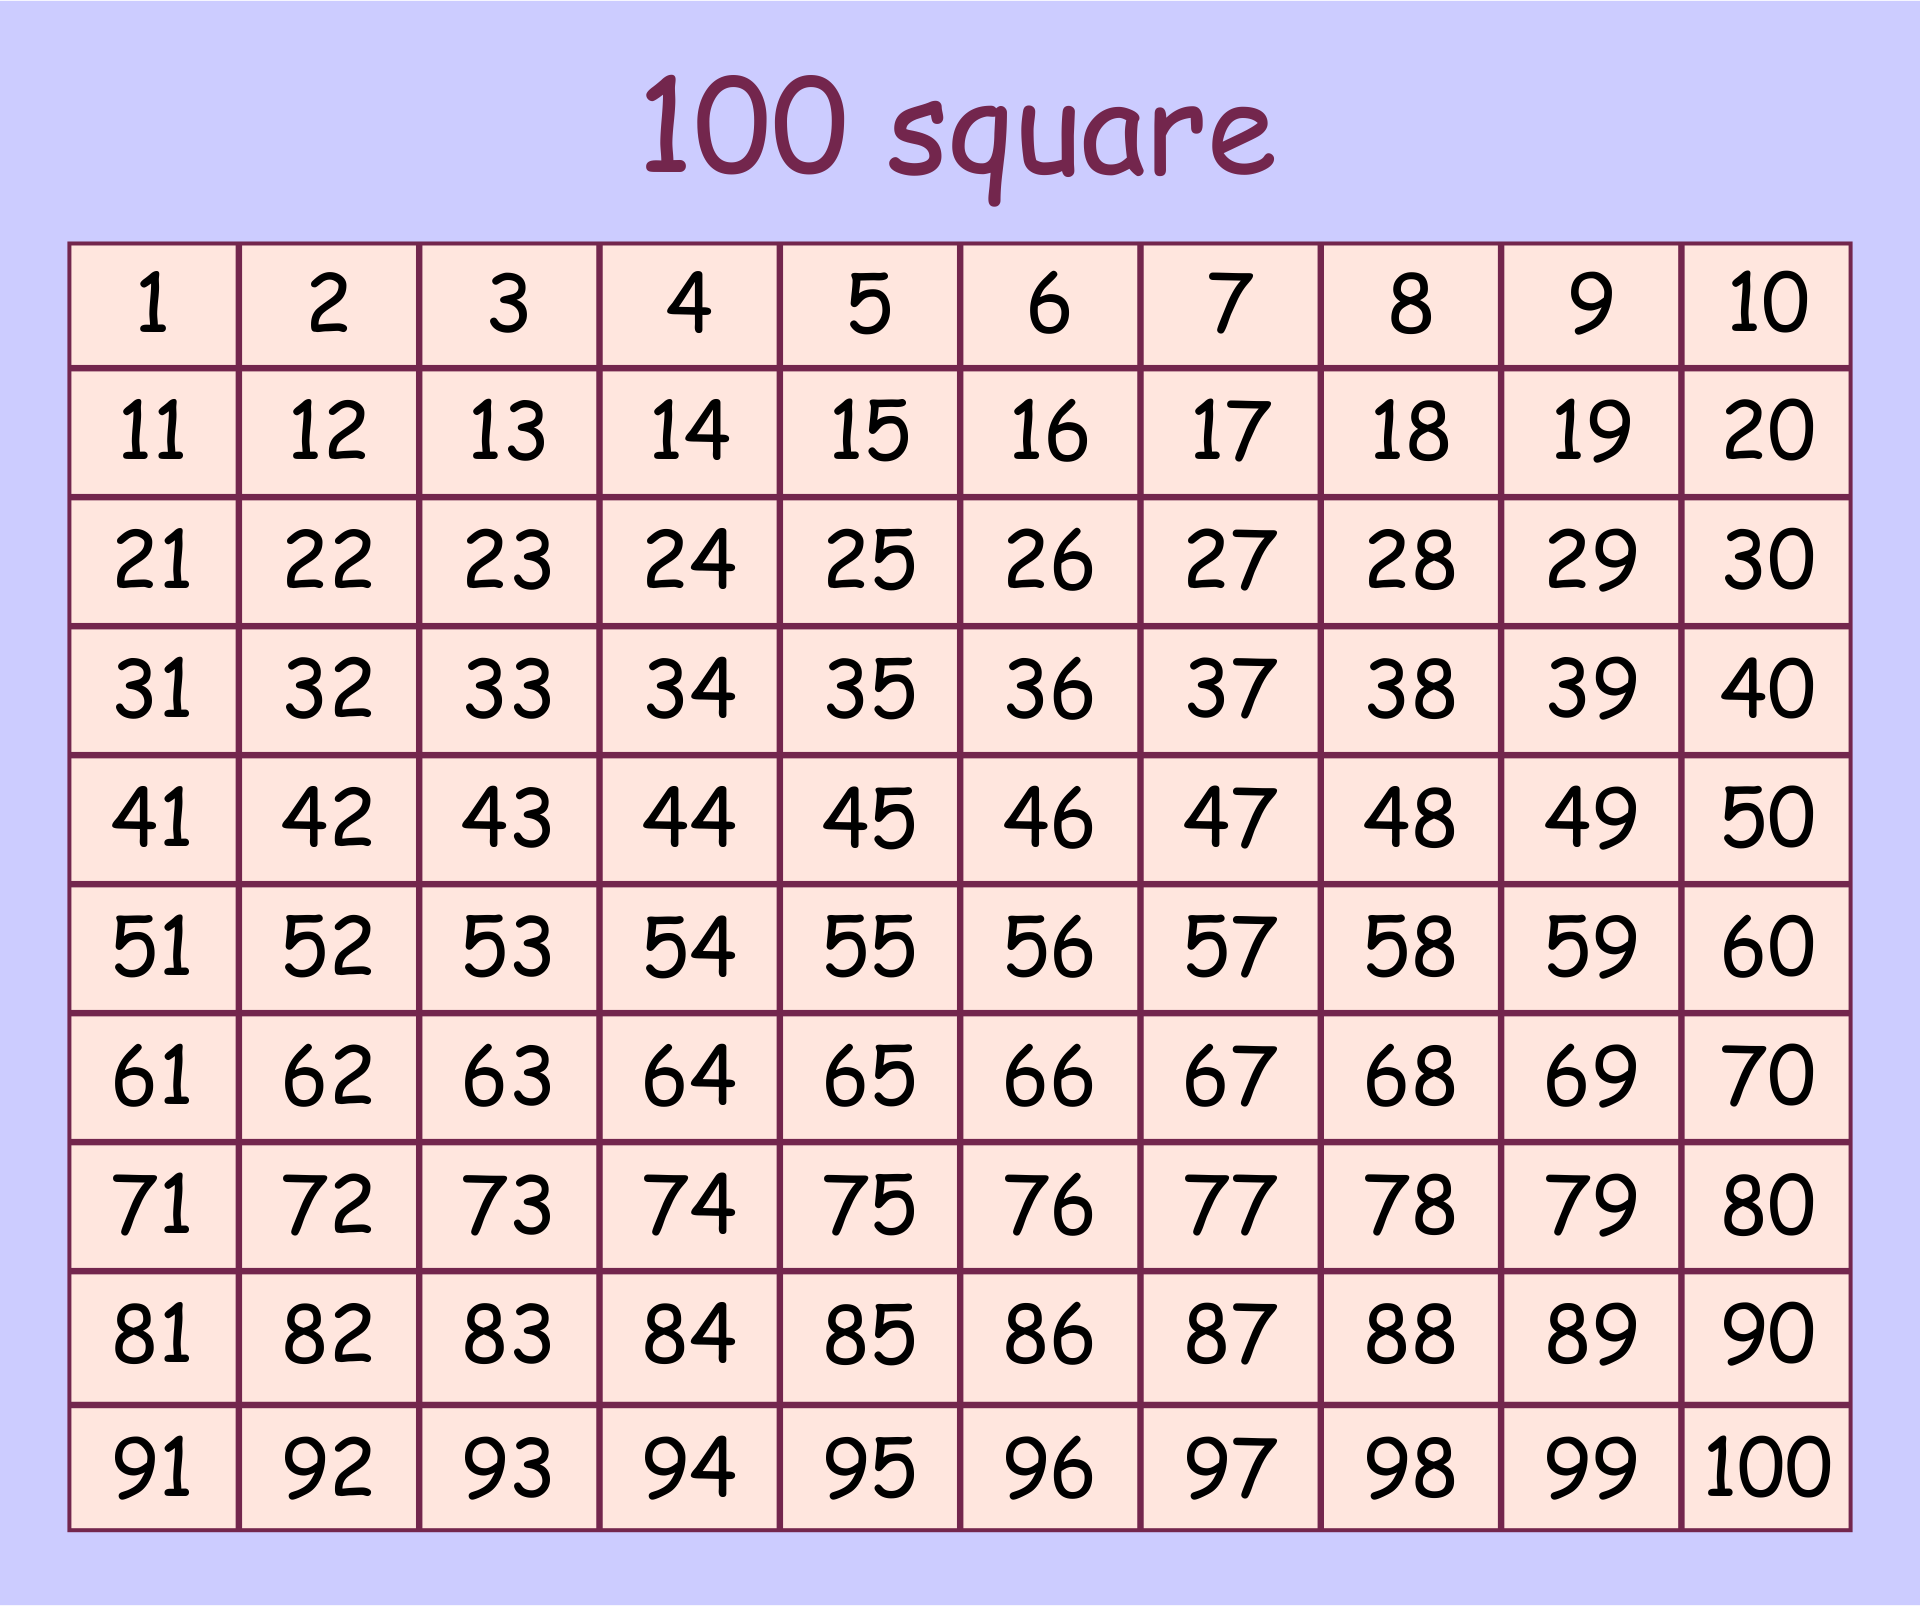 6 Best Images of Printable Hundred Square Printable 100 Square